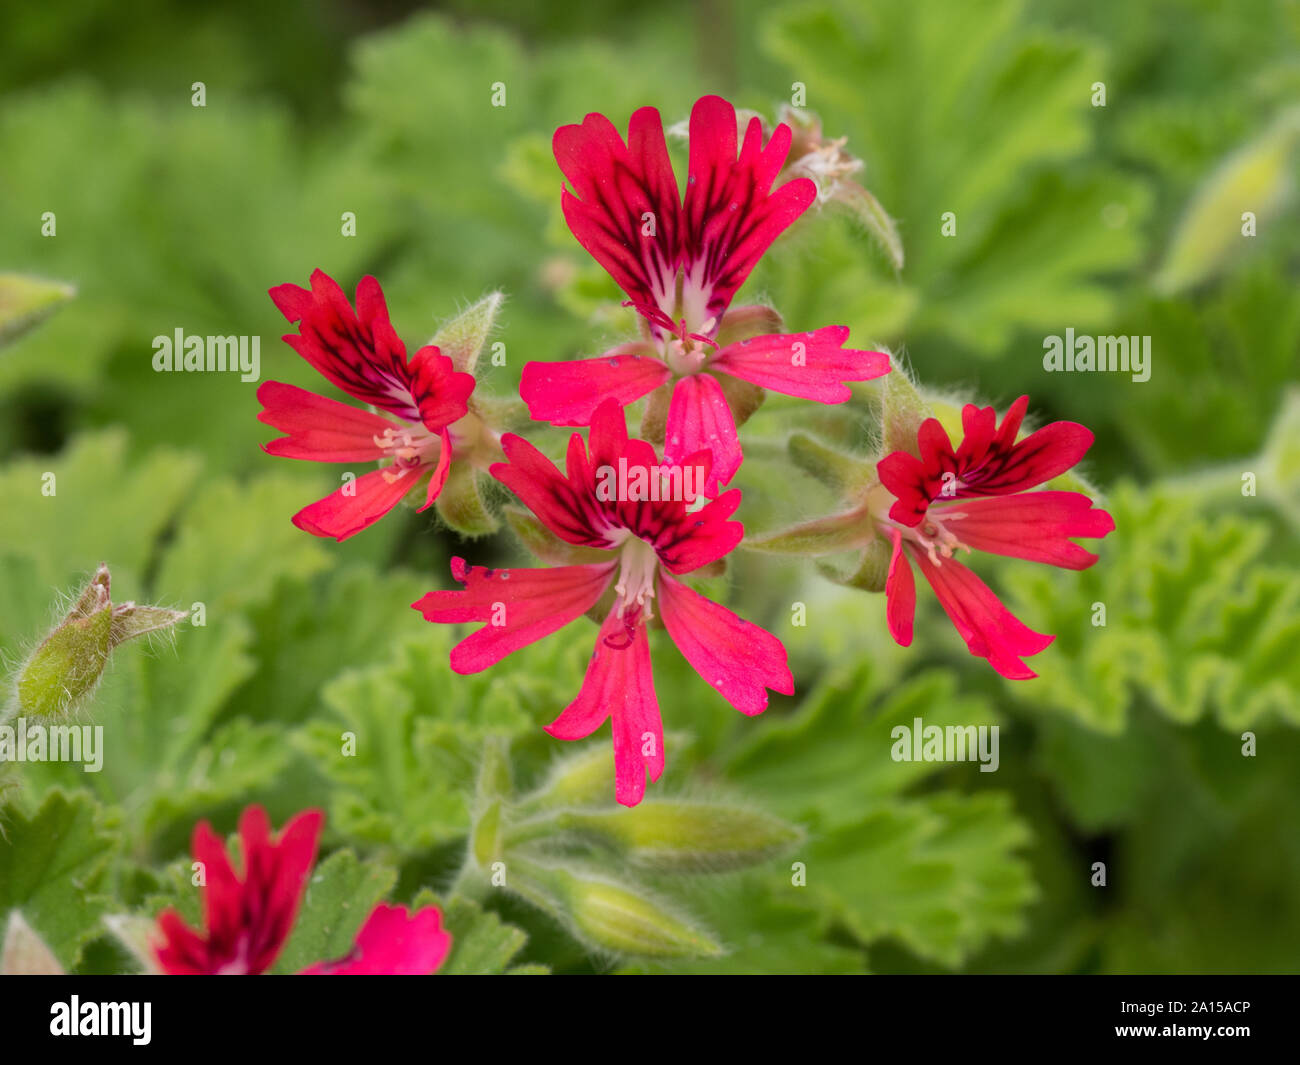 A close up of the flowers of the scented geranium Shottesham Pet Stock Photo